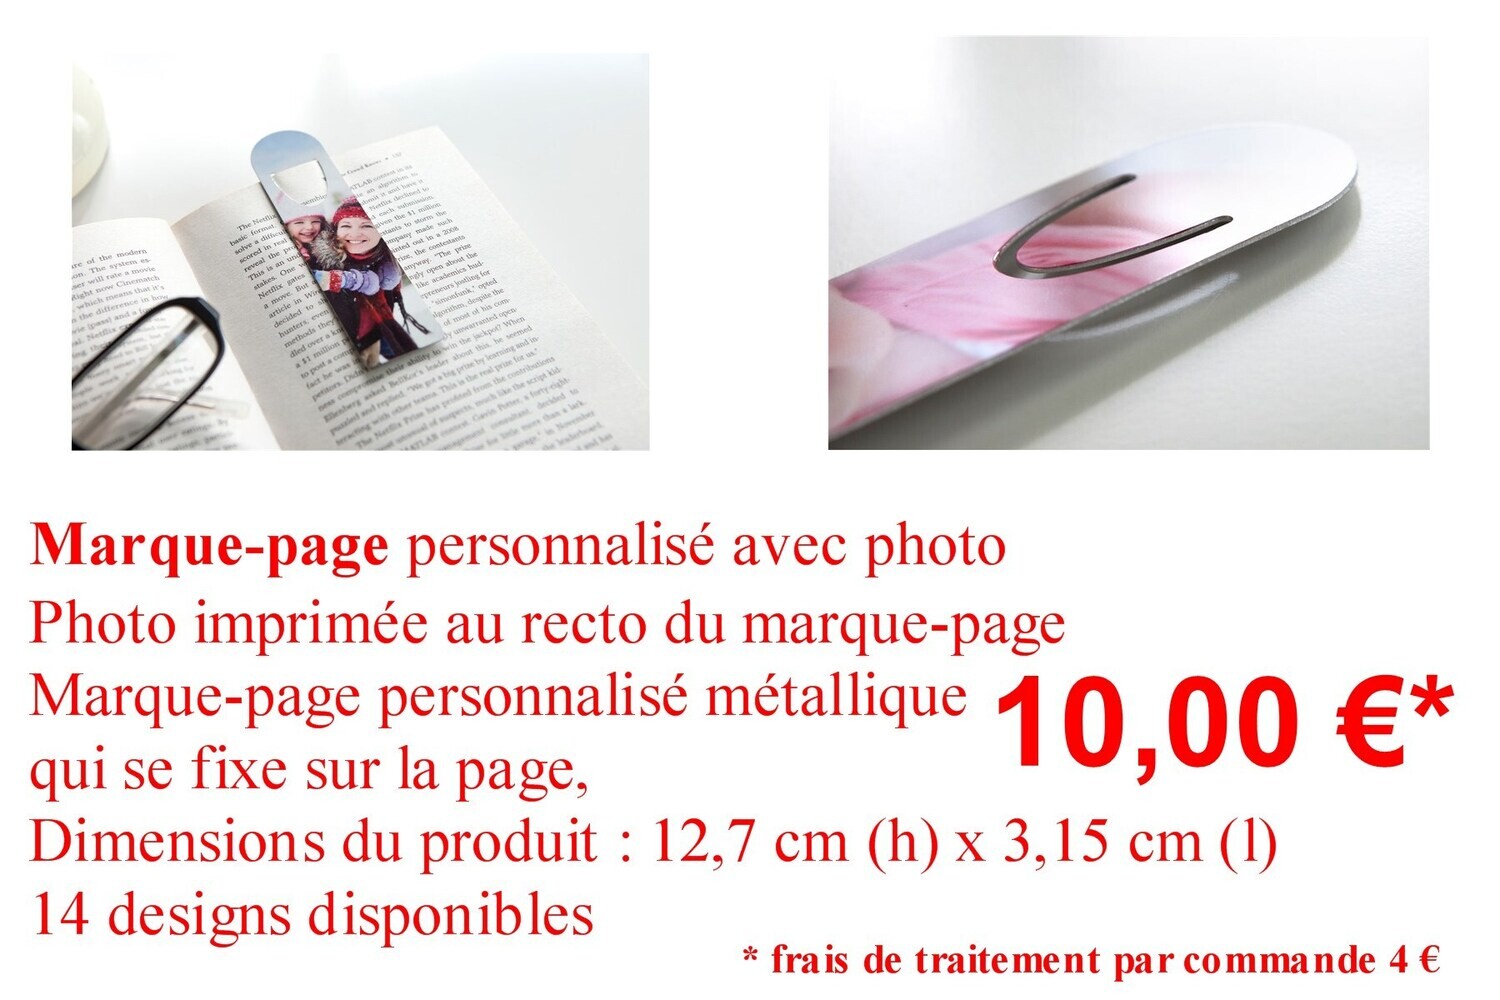 Marque pages